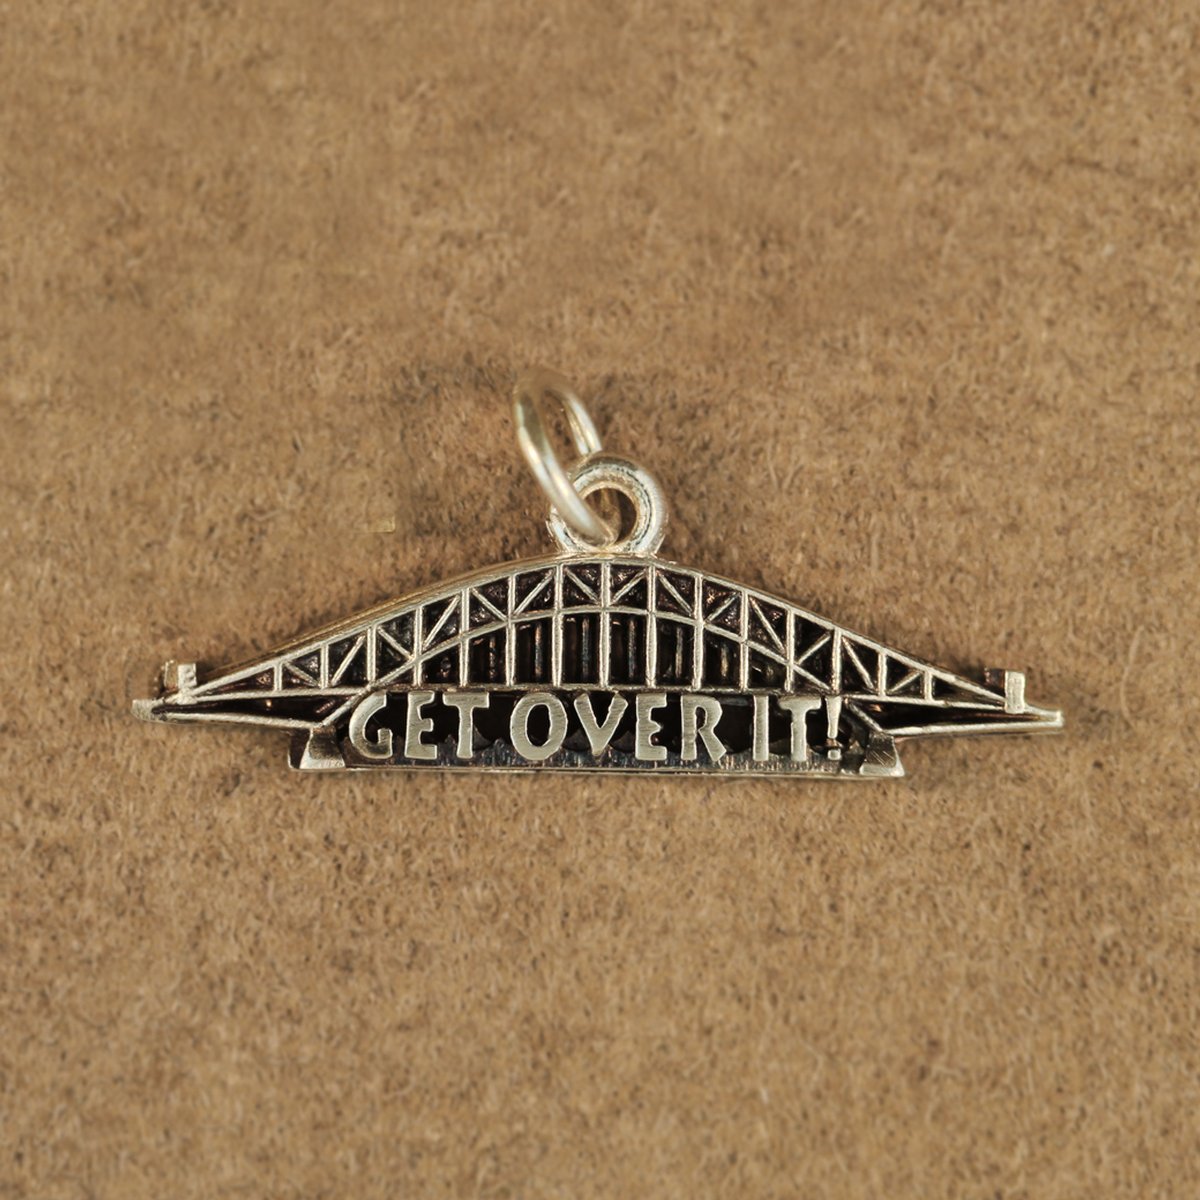 Get Over It Canal Bridge Charm Large